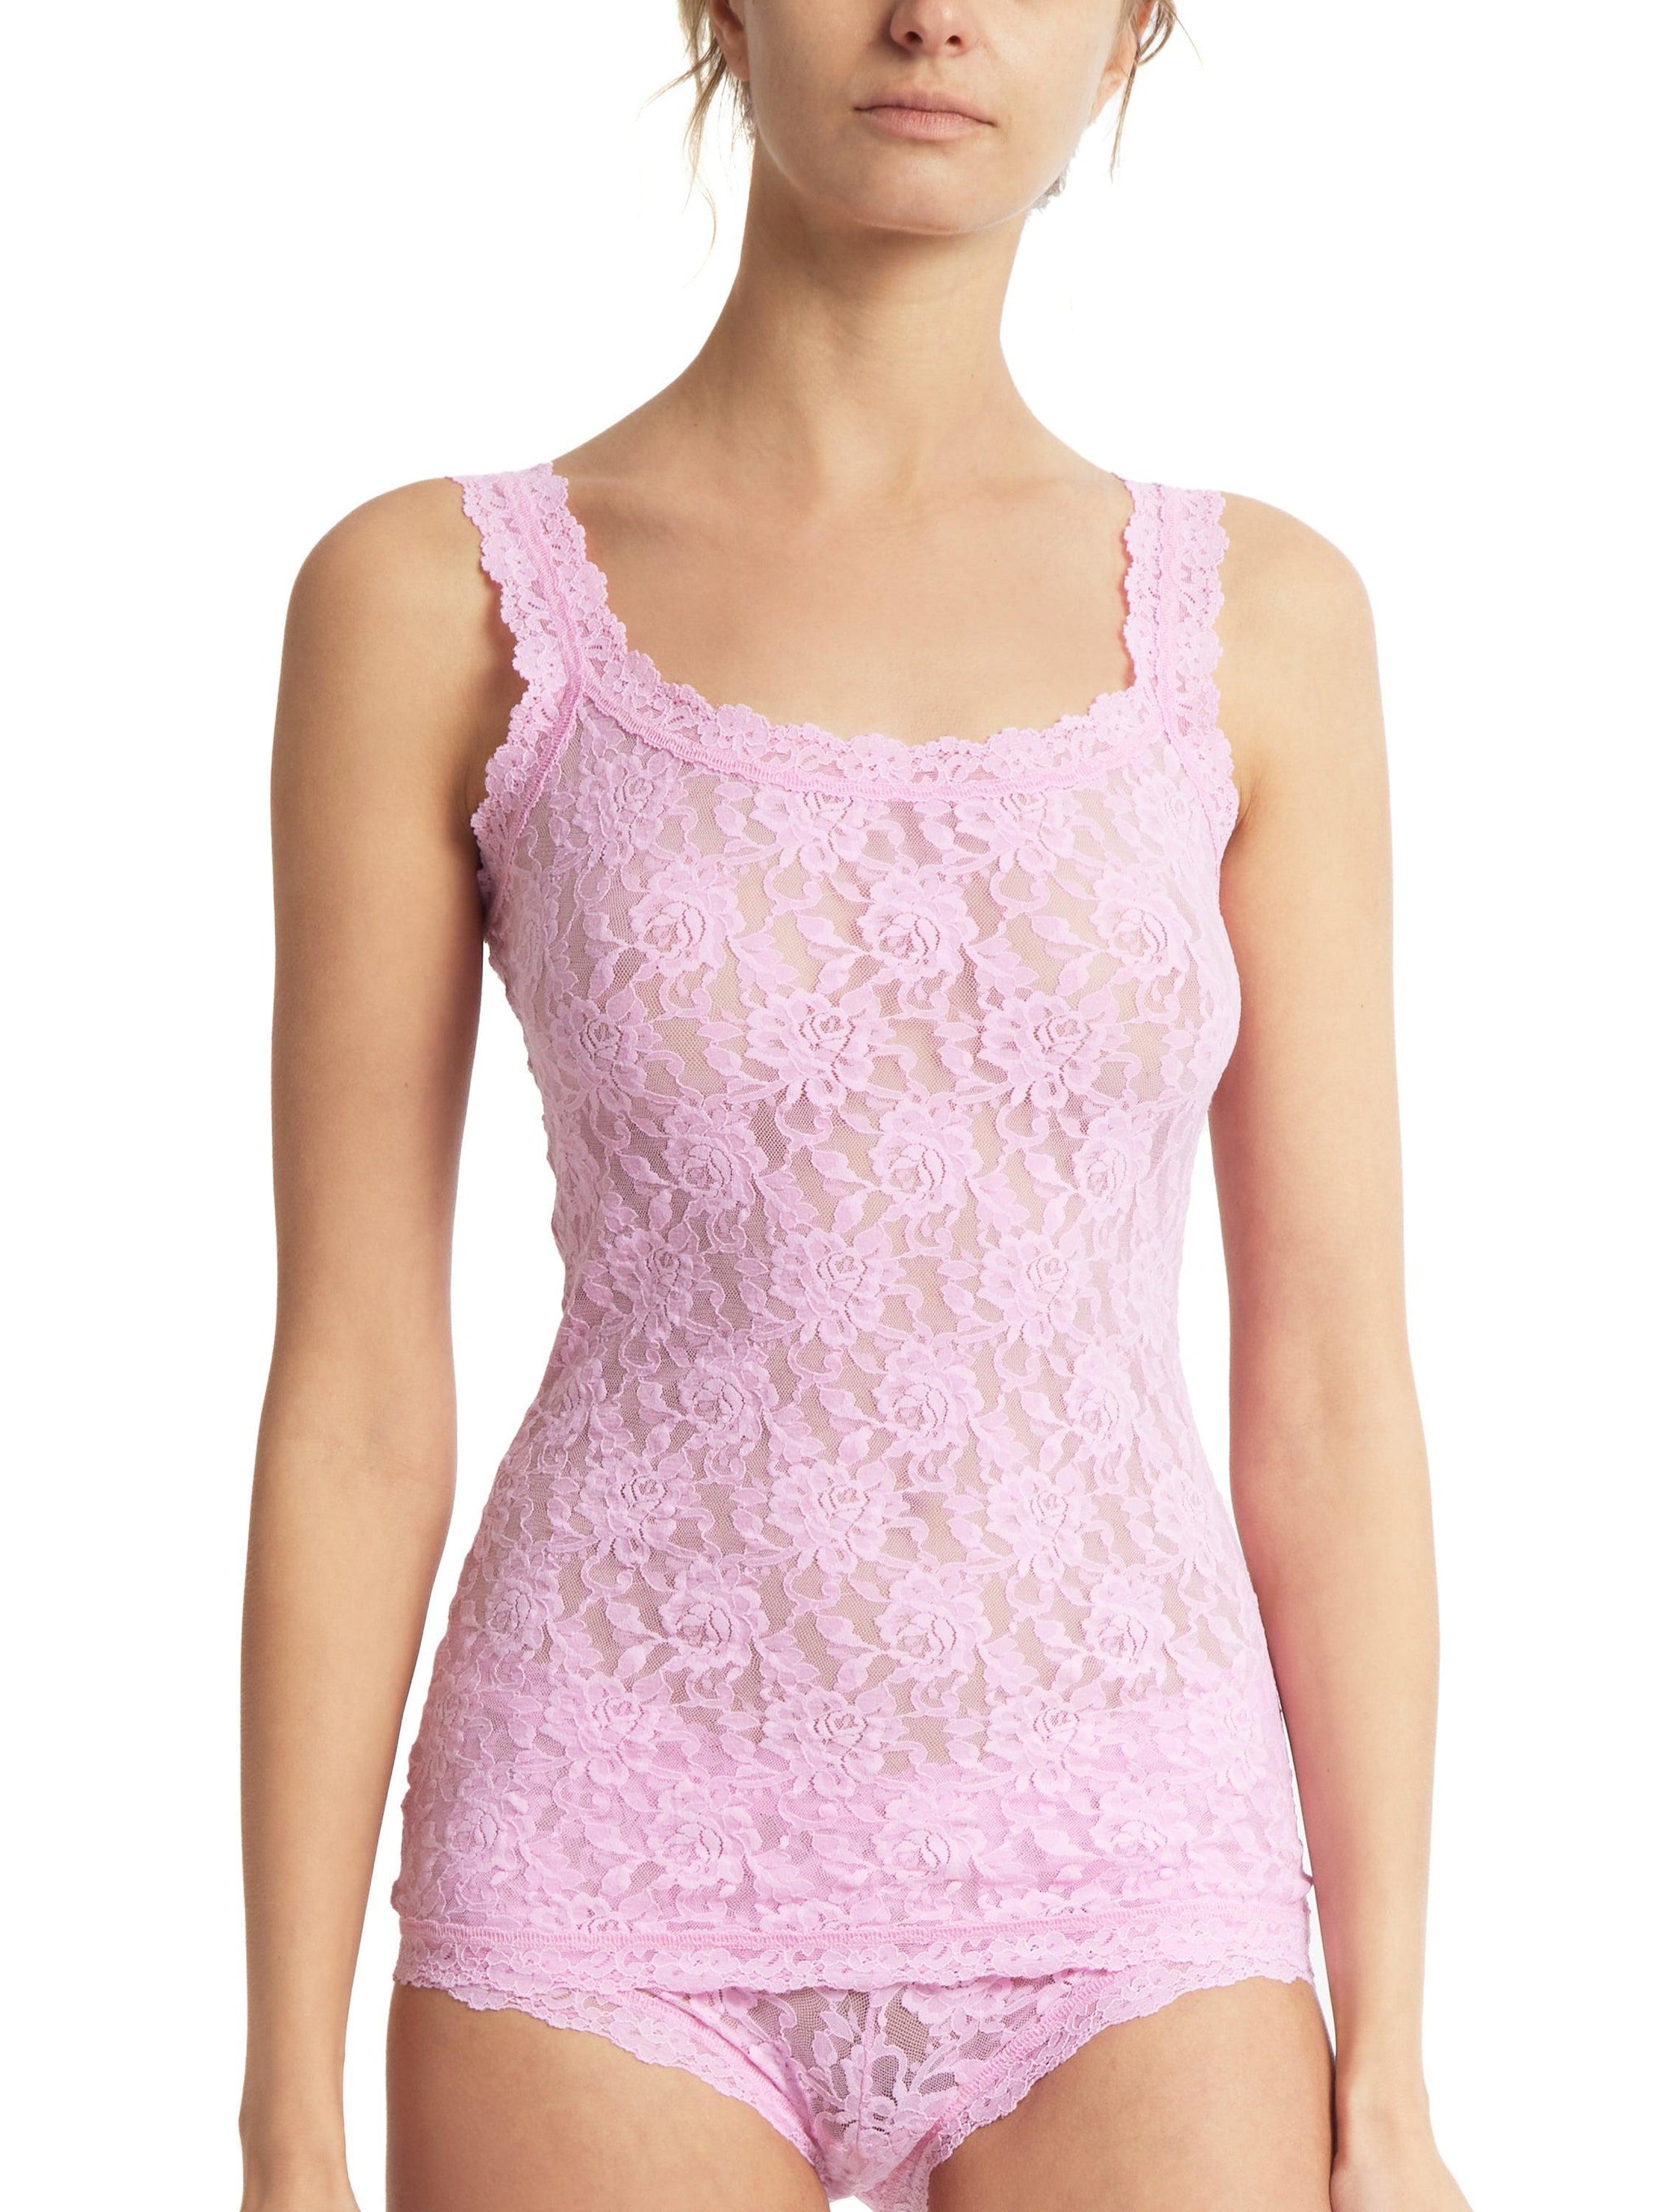 Vintage Pink Lace Camisole Tank Top Cami By Warner's